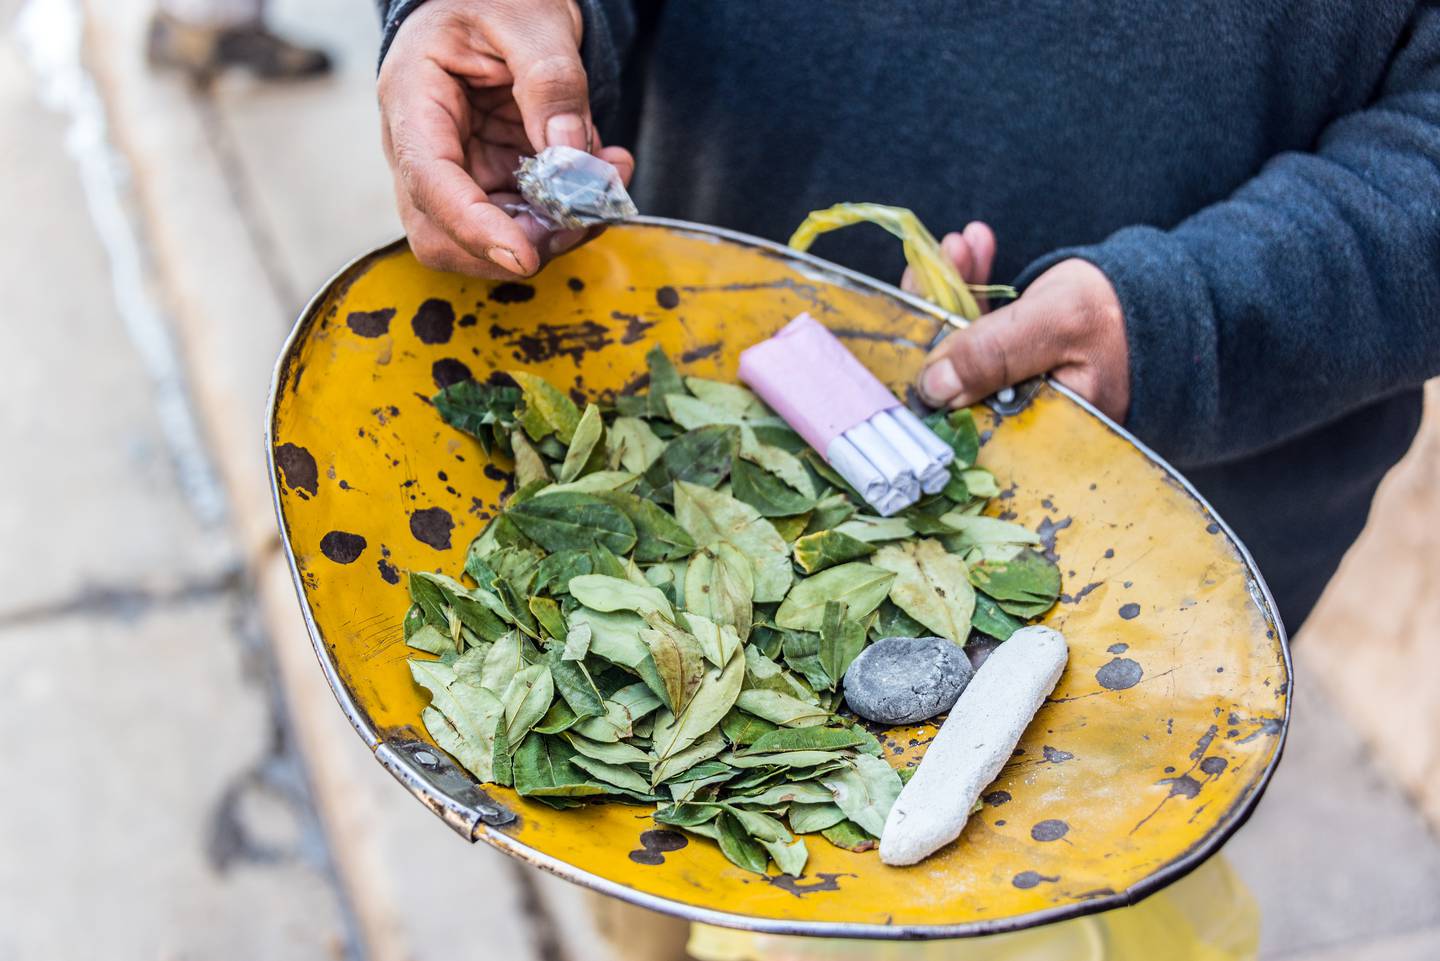 The production of coca lead for its traditional use, to be masticated (called 'pijcheo') is legal in Bolivia, but a large percentage of the harvested crop ends up being trafficked as an ingredient for cocaine